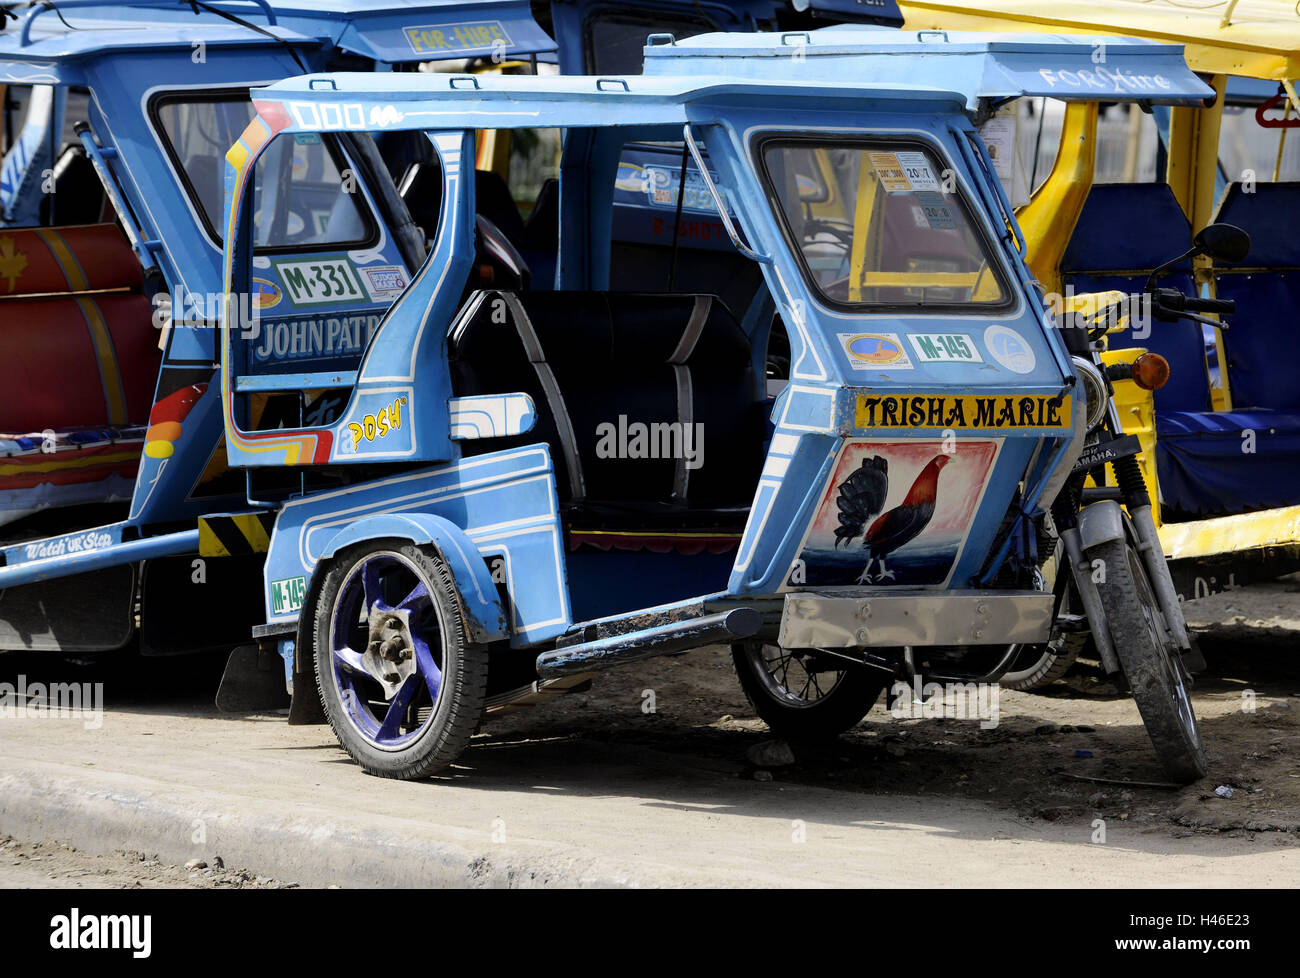 The Philippines, Boracay, sidecars, tricycle, vacation, travelling, holidays, technology, colourfully, taxi, vehicle, tradition, park, tourism, promotion, motorcycle, Stock Photo